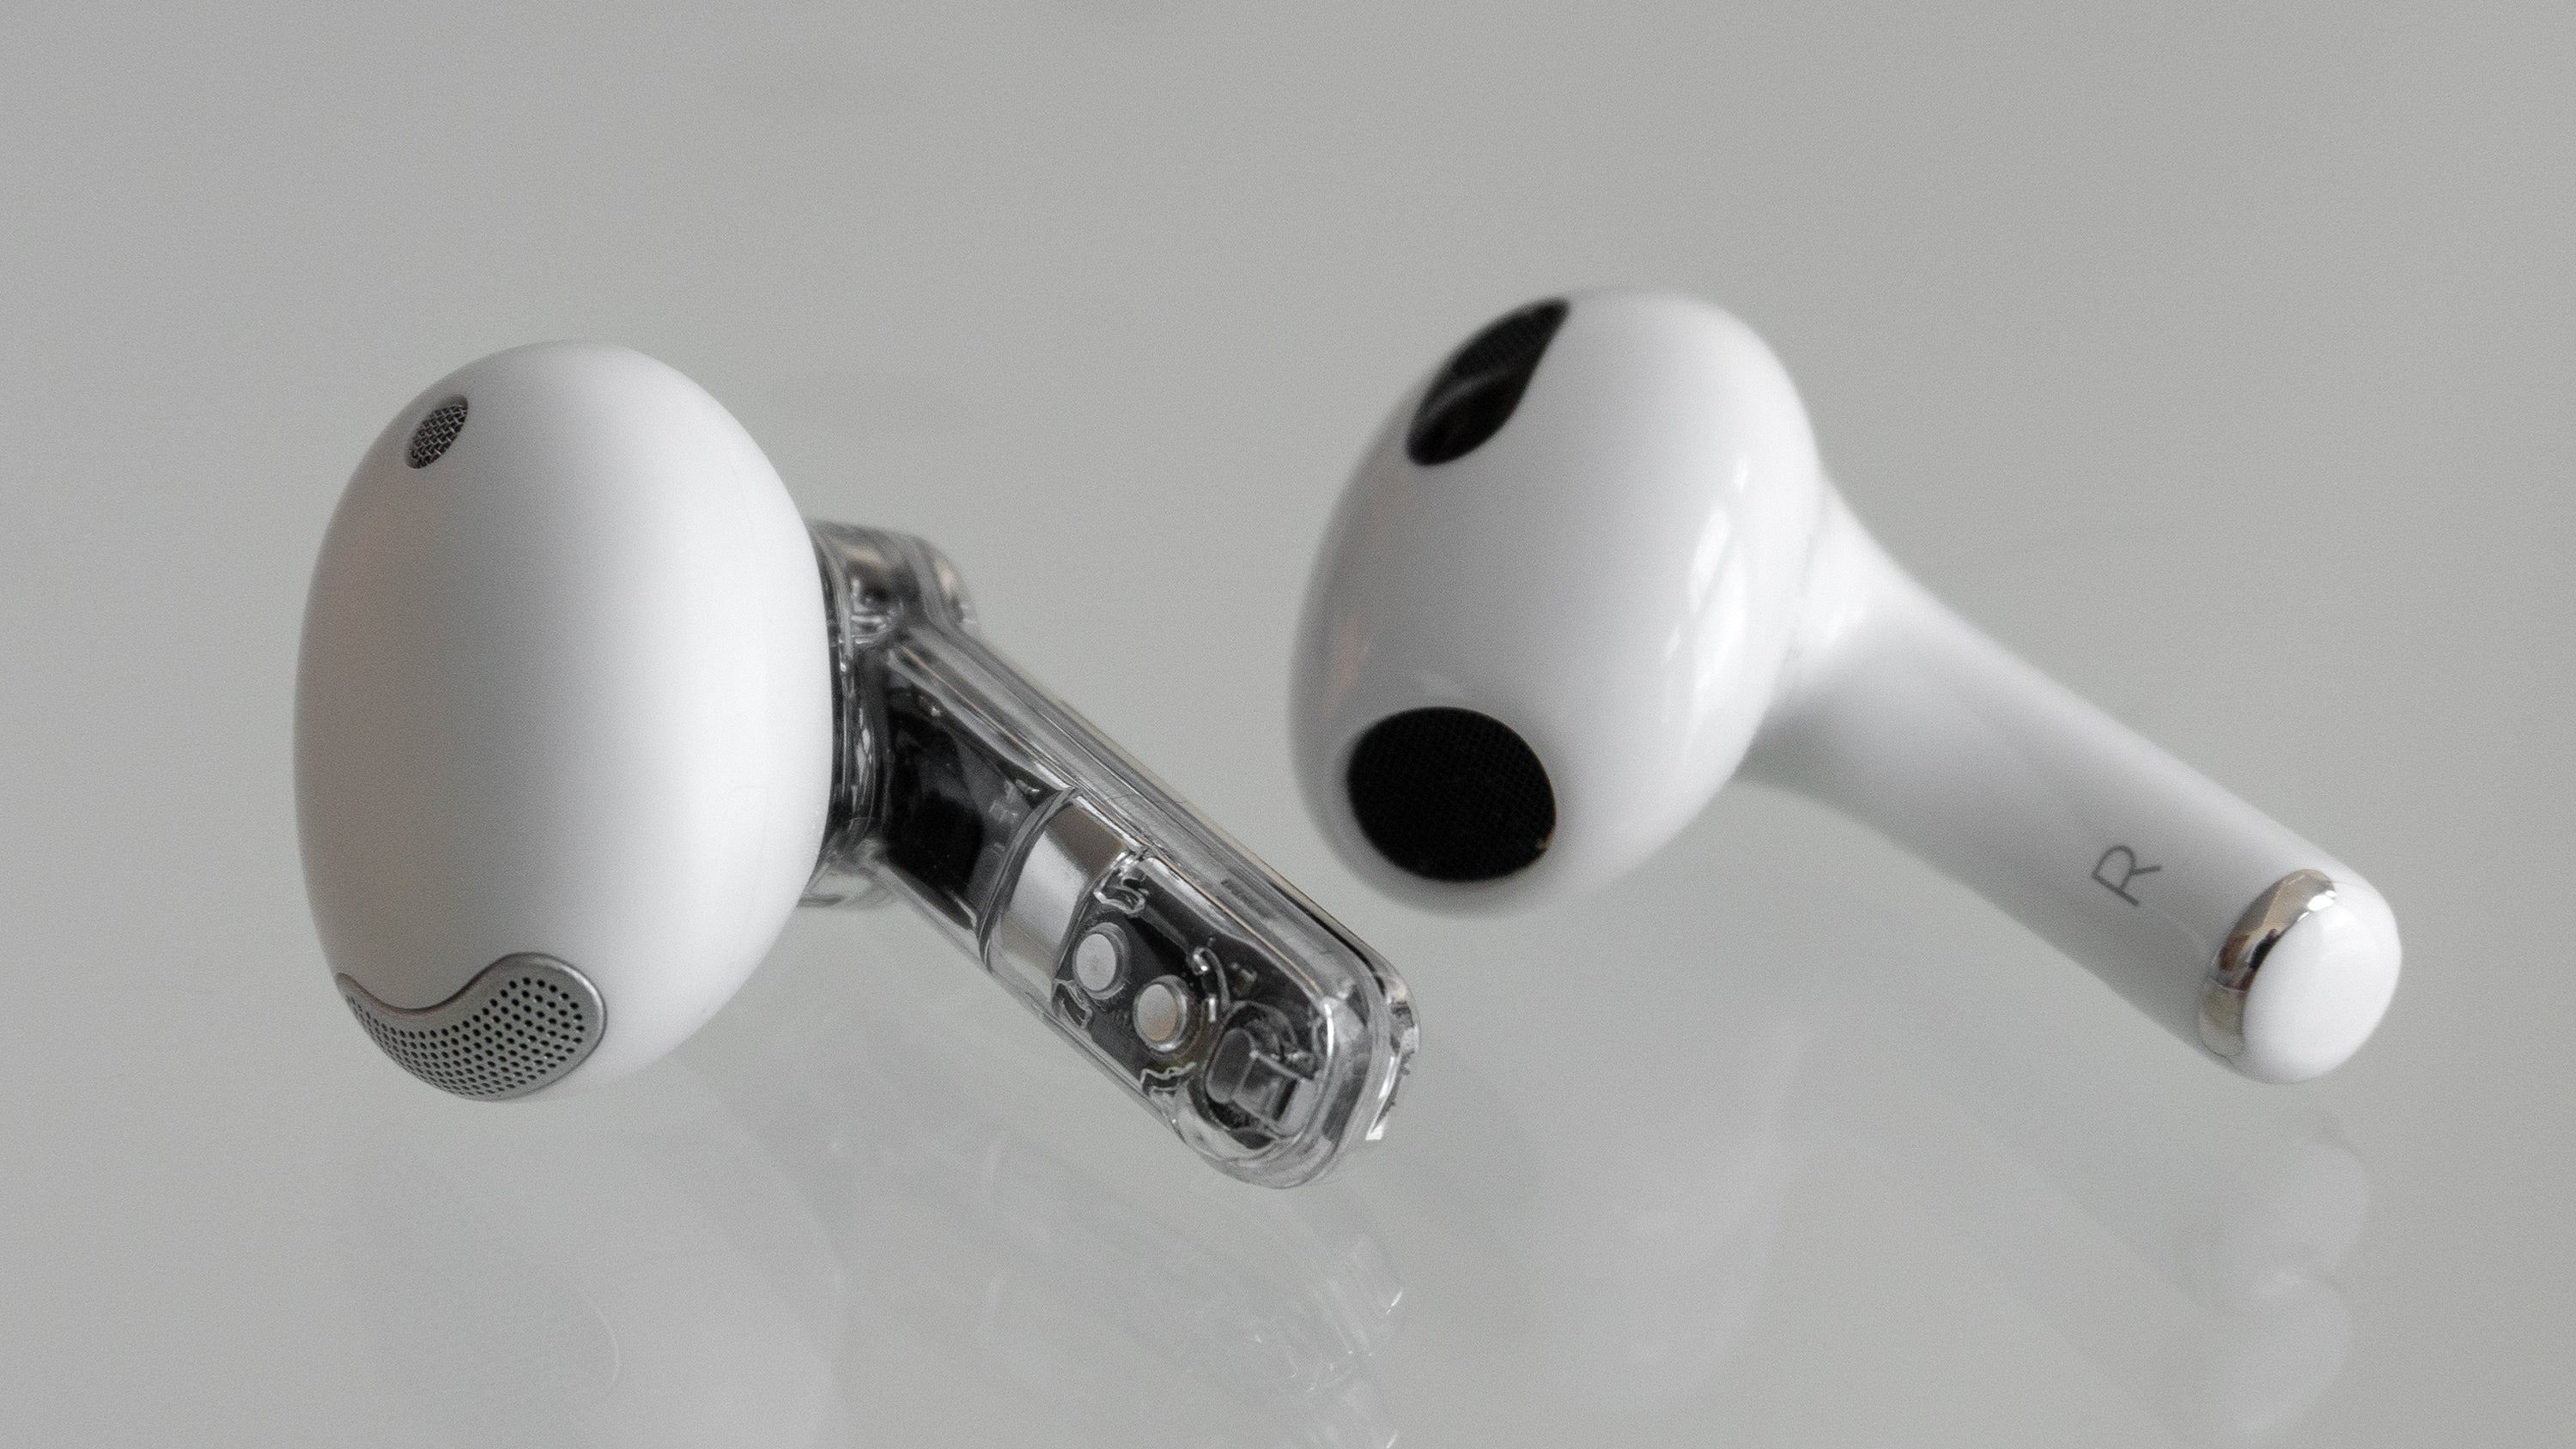 The Ear (stick) (left) compared to the third-gen AirPod (right) which are more or less identical in size. (Photo: Andrew Liszewski | Gizmodo)